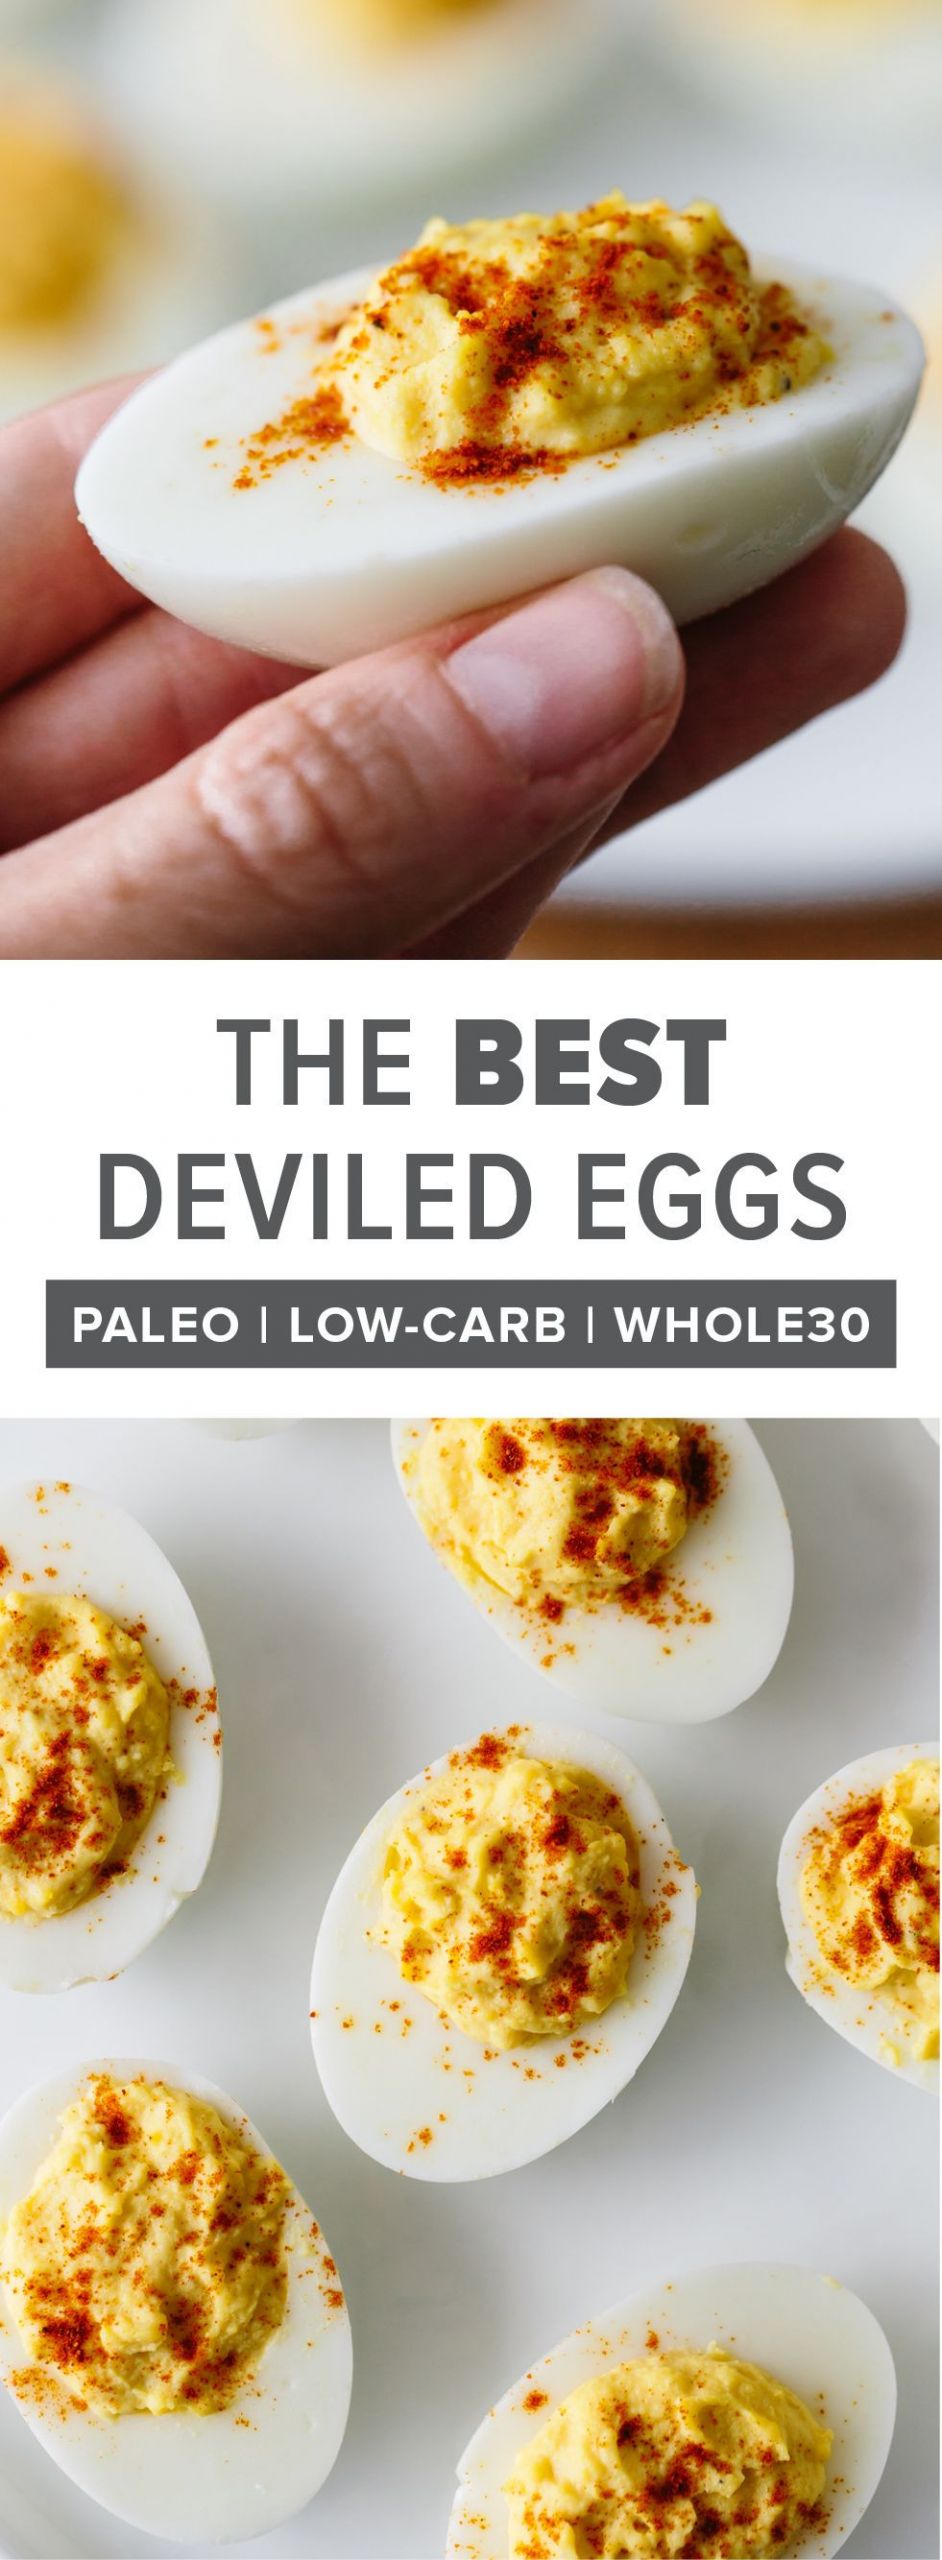 Deviled Eggs Recipe Simple
 This Classic Deviled Eggs recipe is so easy to make I